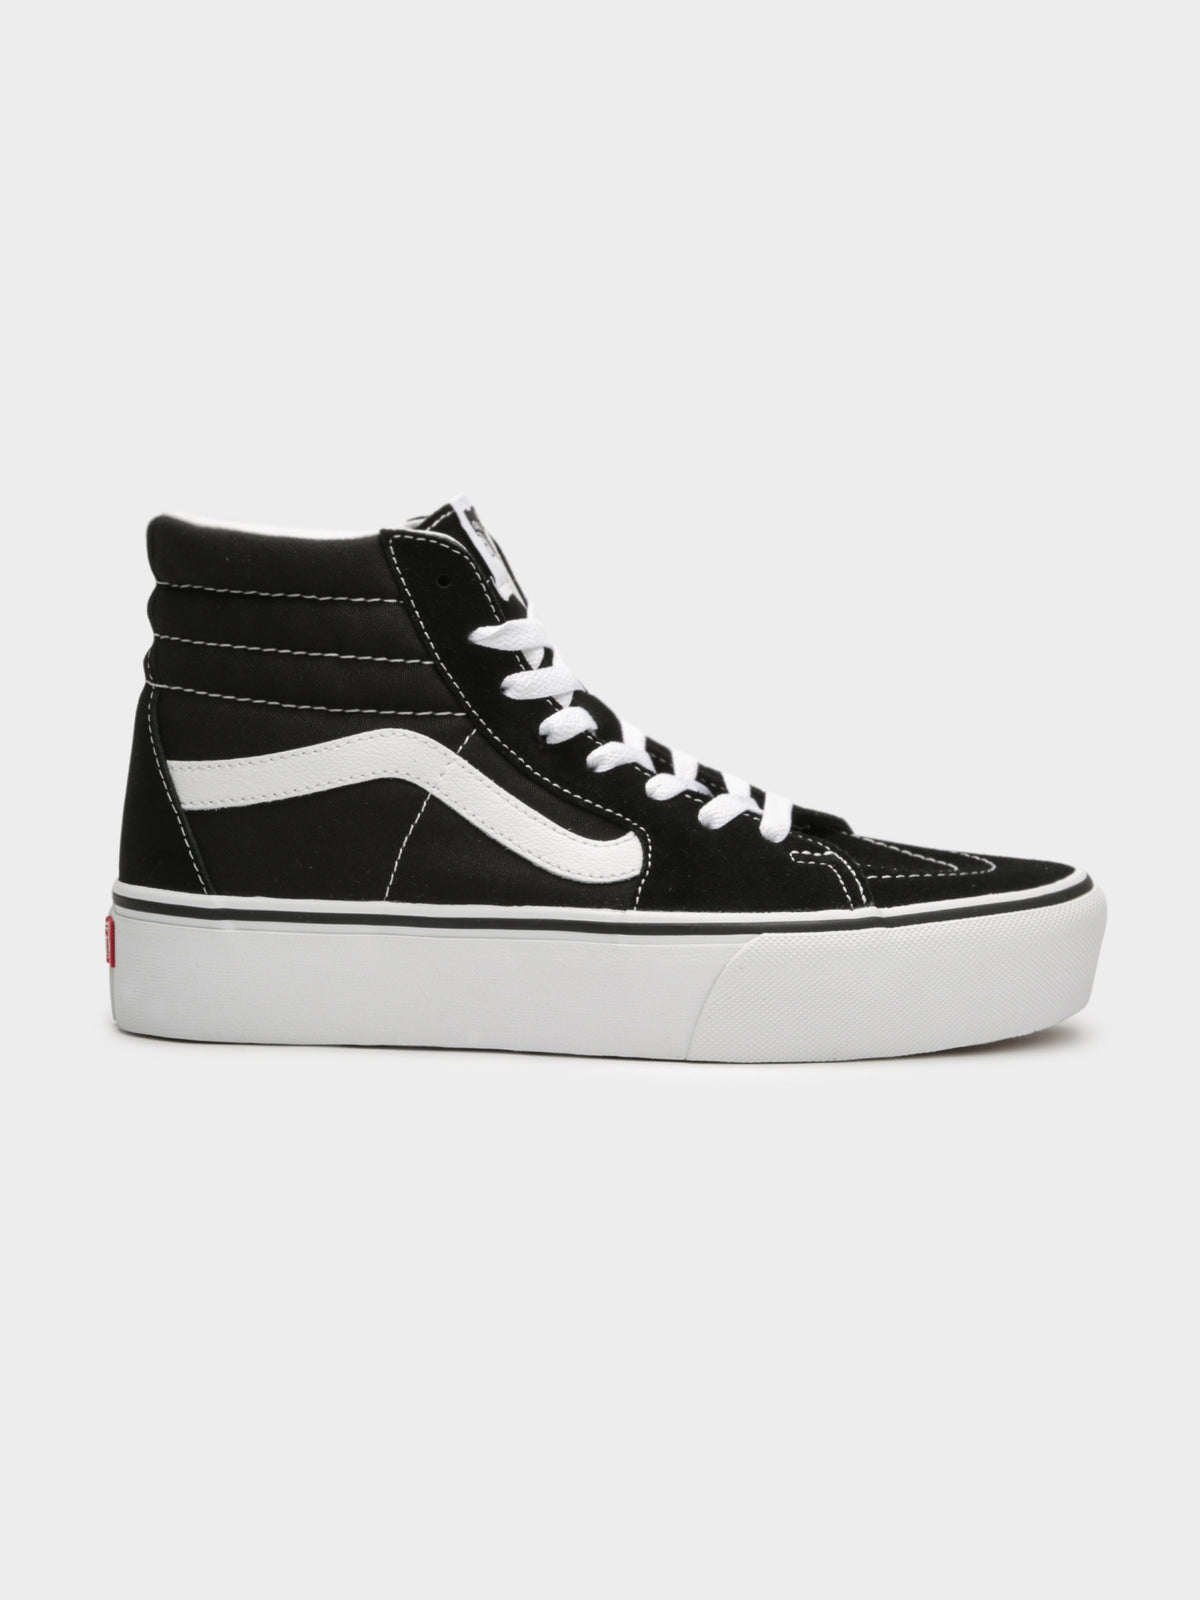 Unisex SK8 Hi-Rise Platform Sneakers in Black and White